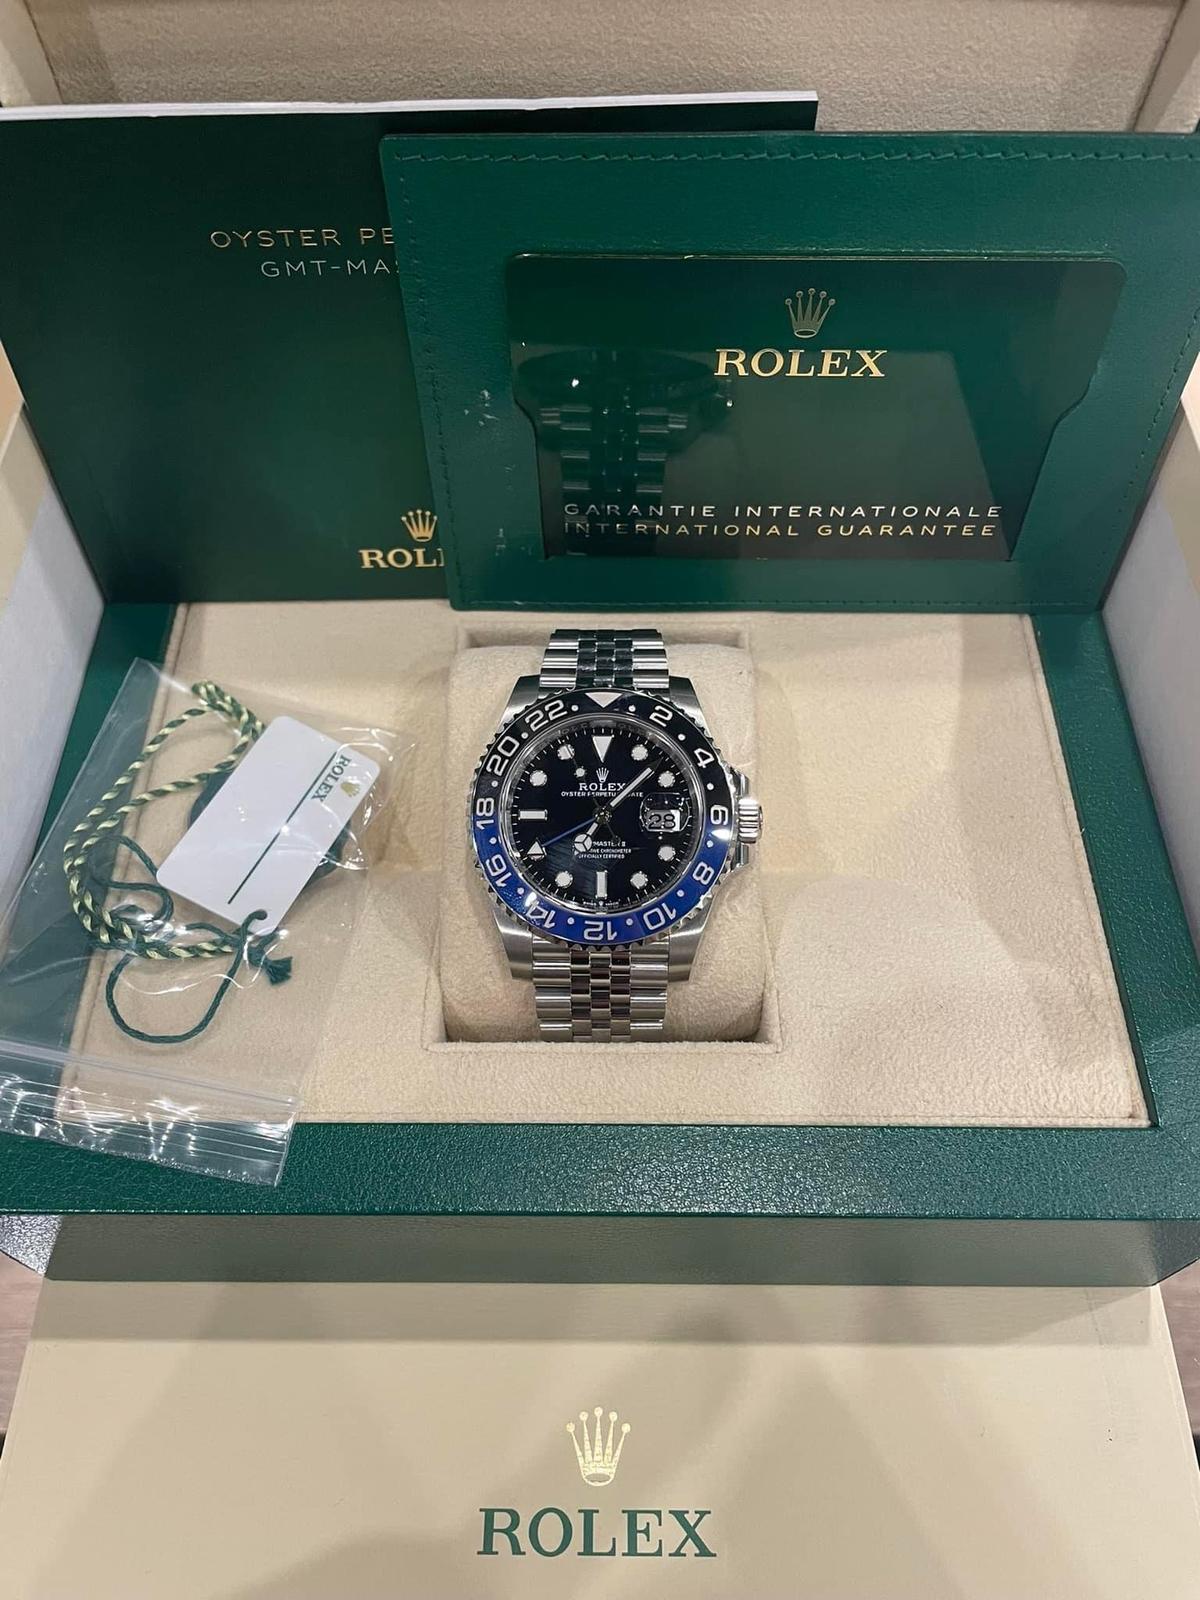 USED GMT MASTER II 40MM 'BATMAN' ROLEX JUBILEE COMES WITH BOX AND PAPERS IN LIKE NEW CONDITION